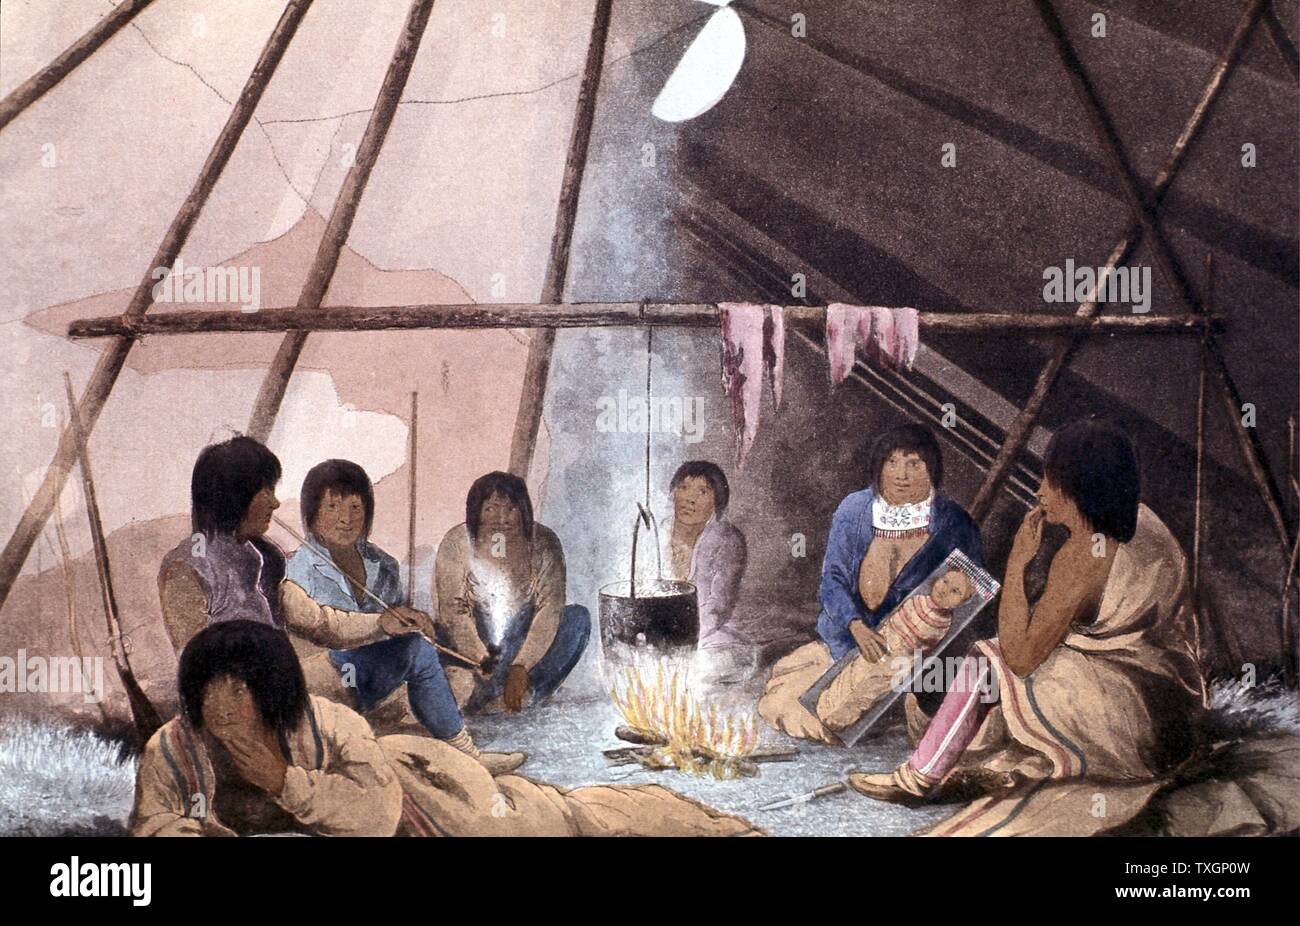 Interior of Cree Indian tent. Man smoking: Papoose in 'cradle': Cooking pot suspended over fire. From John Franklin 'Narrative of a Journey to the Shores of the Polar Sea' 1823 London Coloured lithograph Stock Photo